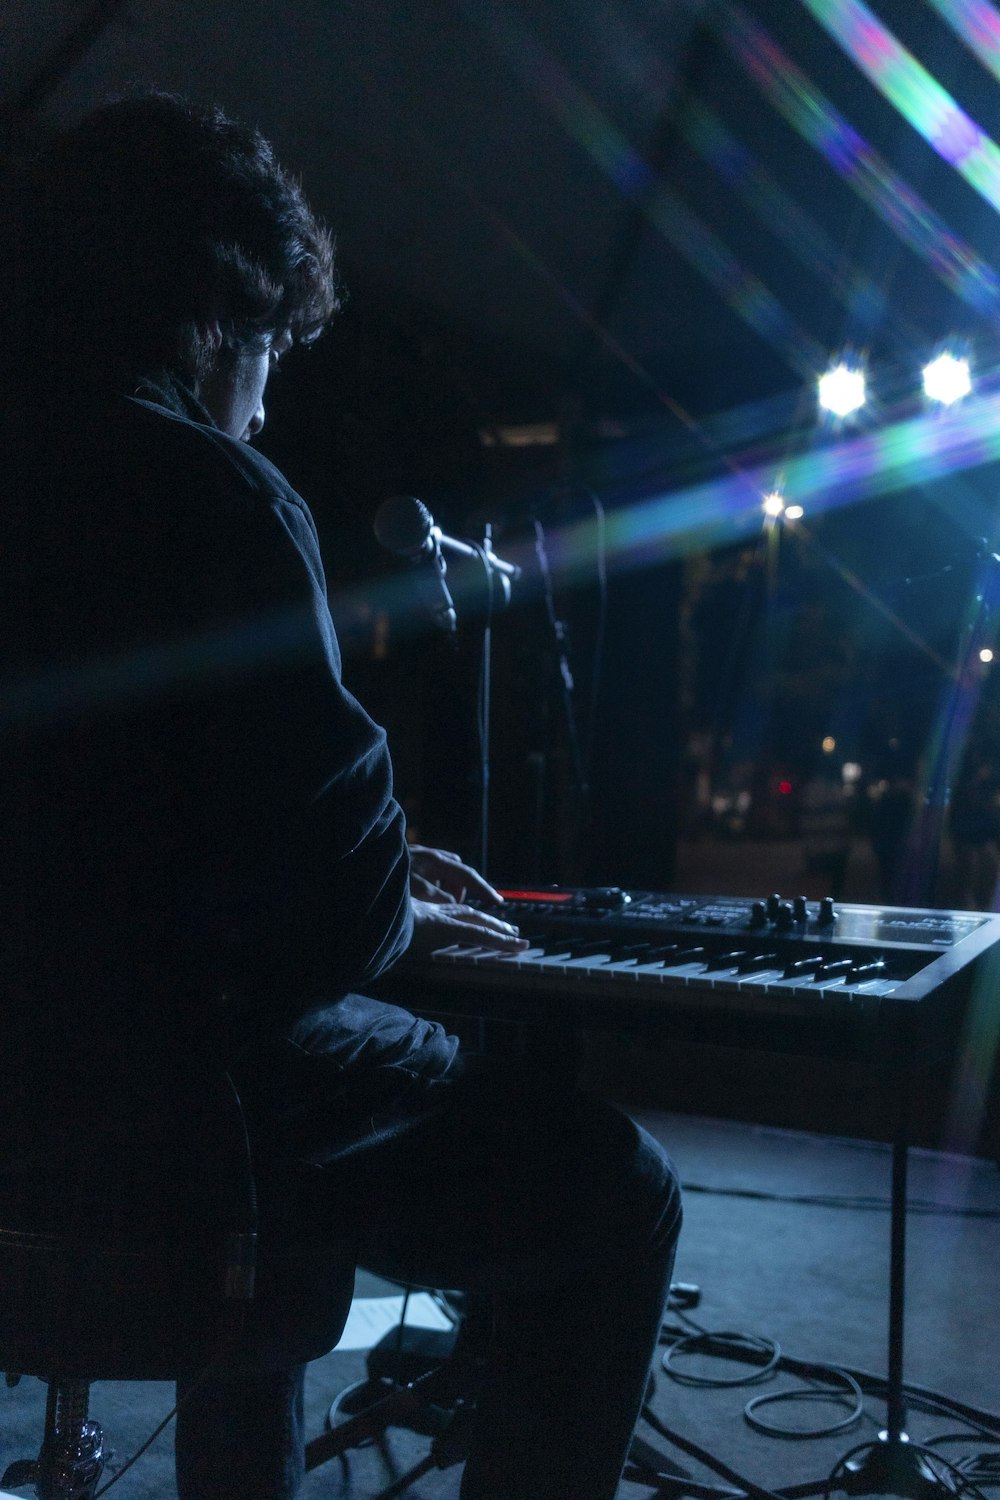 a man sitting at a keyboard in front of a microphone